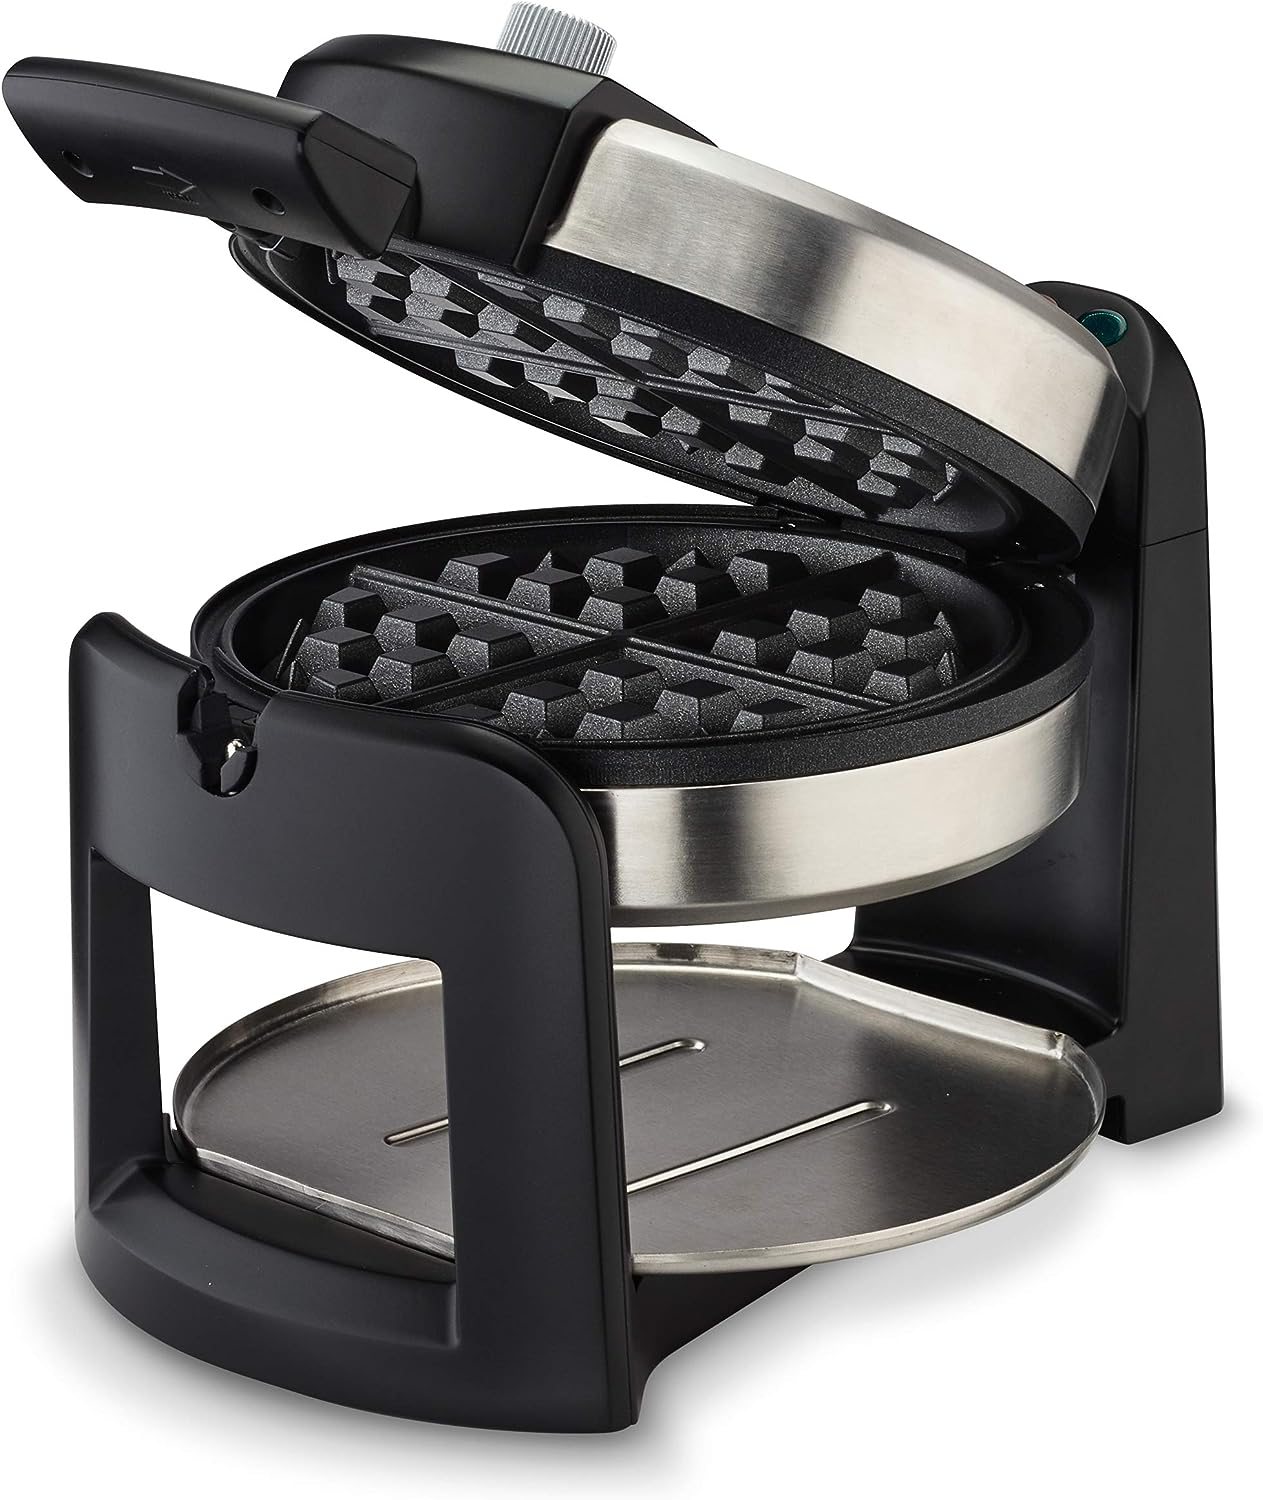 Cuisinart WAF-F30 Round Flip Belgian Waffle Maker 1 Inch Thick Black / Silver